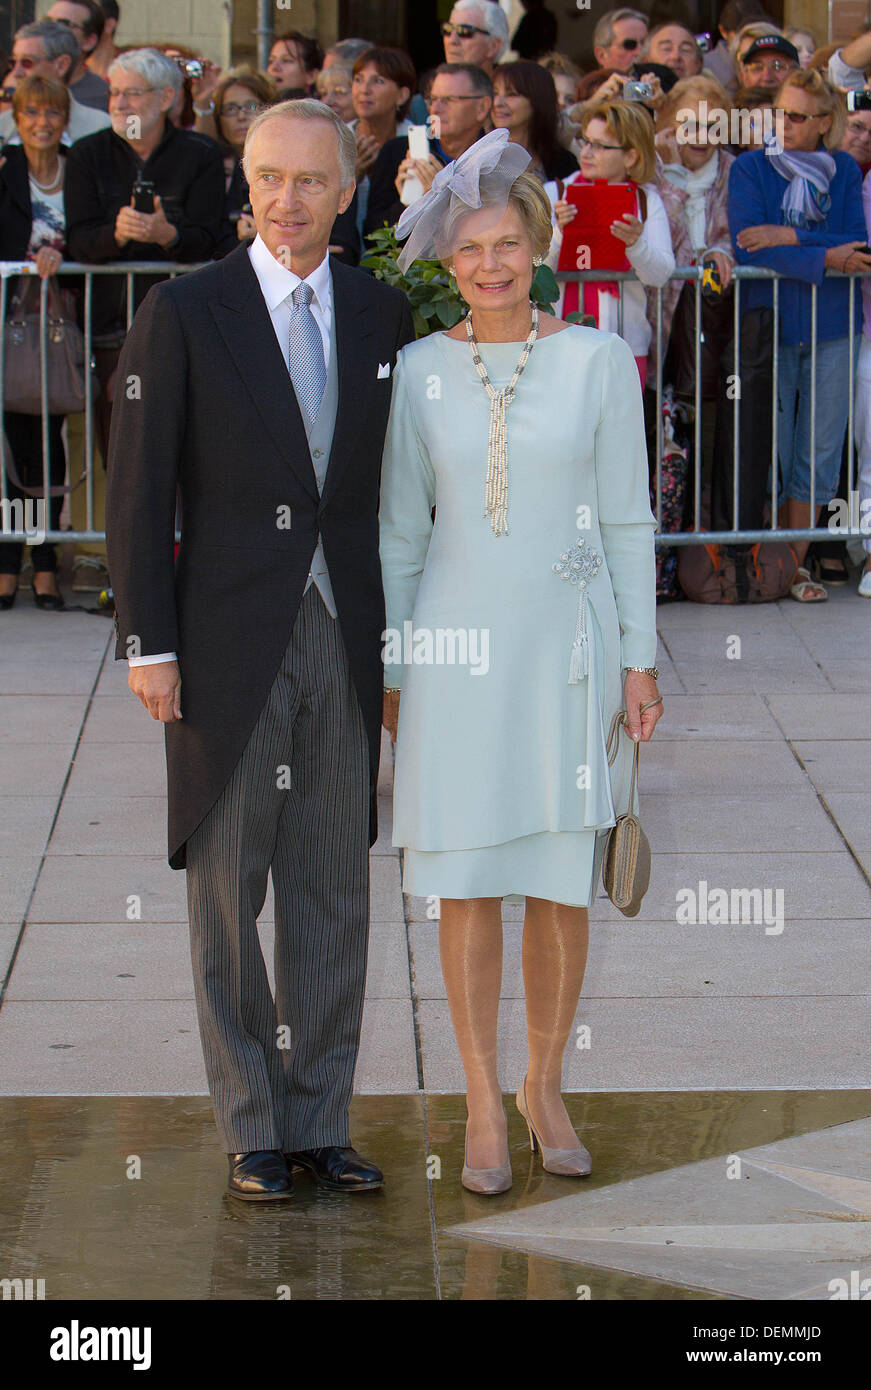 Saint Maximin la Sainte Baume, France. 21st September 2013. Princess Marie Astrid of Luxembourg, Archduke and Prince Carl Christian of Austria arrive for the religious wedding in the Saint Mary Magdalene Basilica in Saint Maximin la Sainte Baume in France, 21 September 2013. Photo: Albert Nieboer-RPE / dpa/Alamy Live News Stock Photo